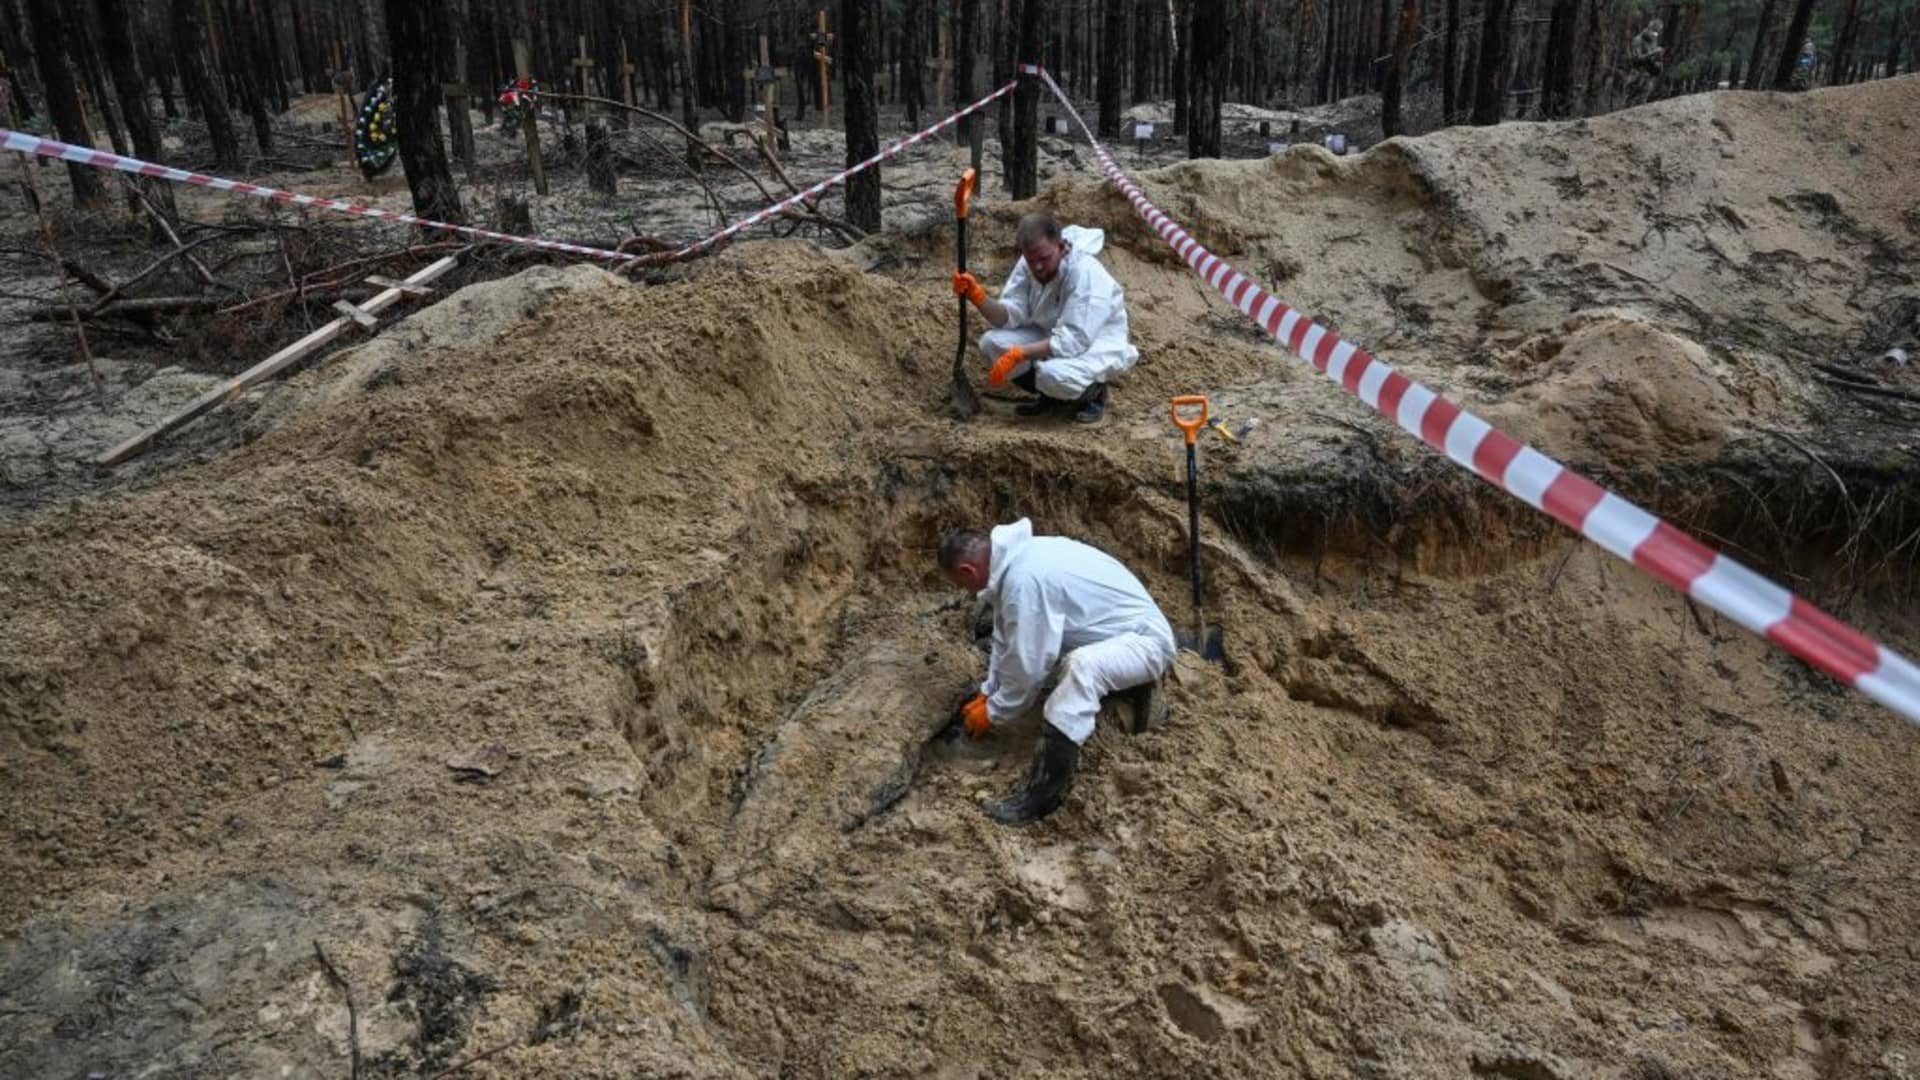 Two forensic technicians uncover a body in a forest on the outskirts of Izyum, eastern Ukraine on September 16, 2022.